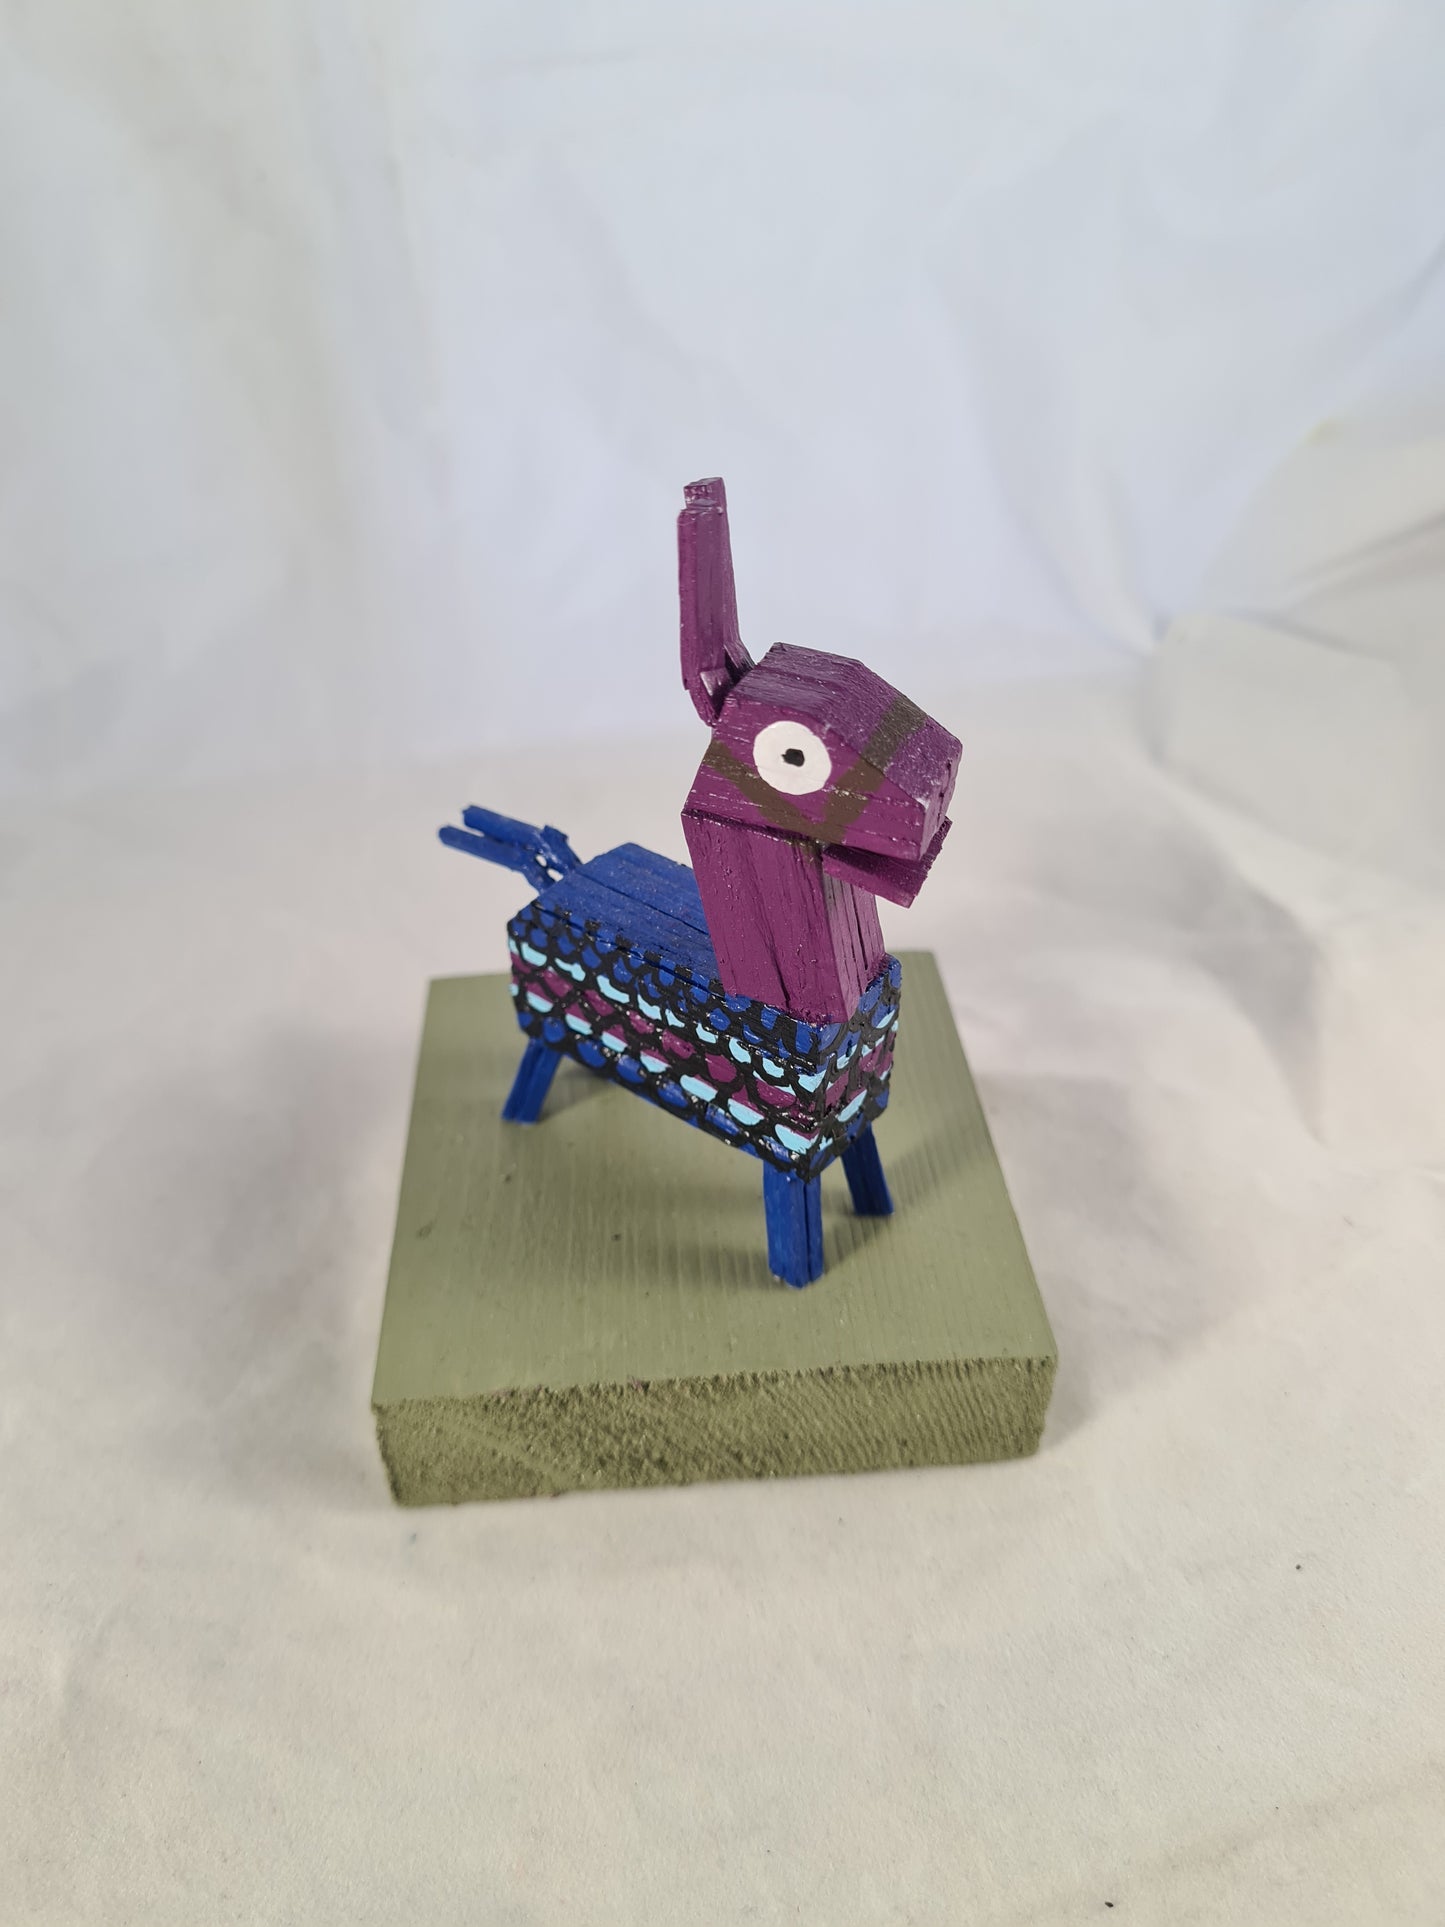 Loot Llama - Handcrafted Wooden Matchstick Figures - Gifts, Ornaments and Decor By Tiggidy Designs